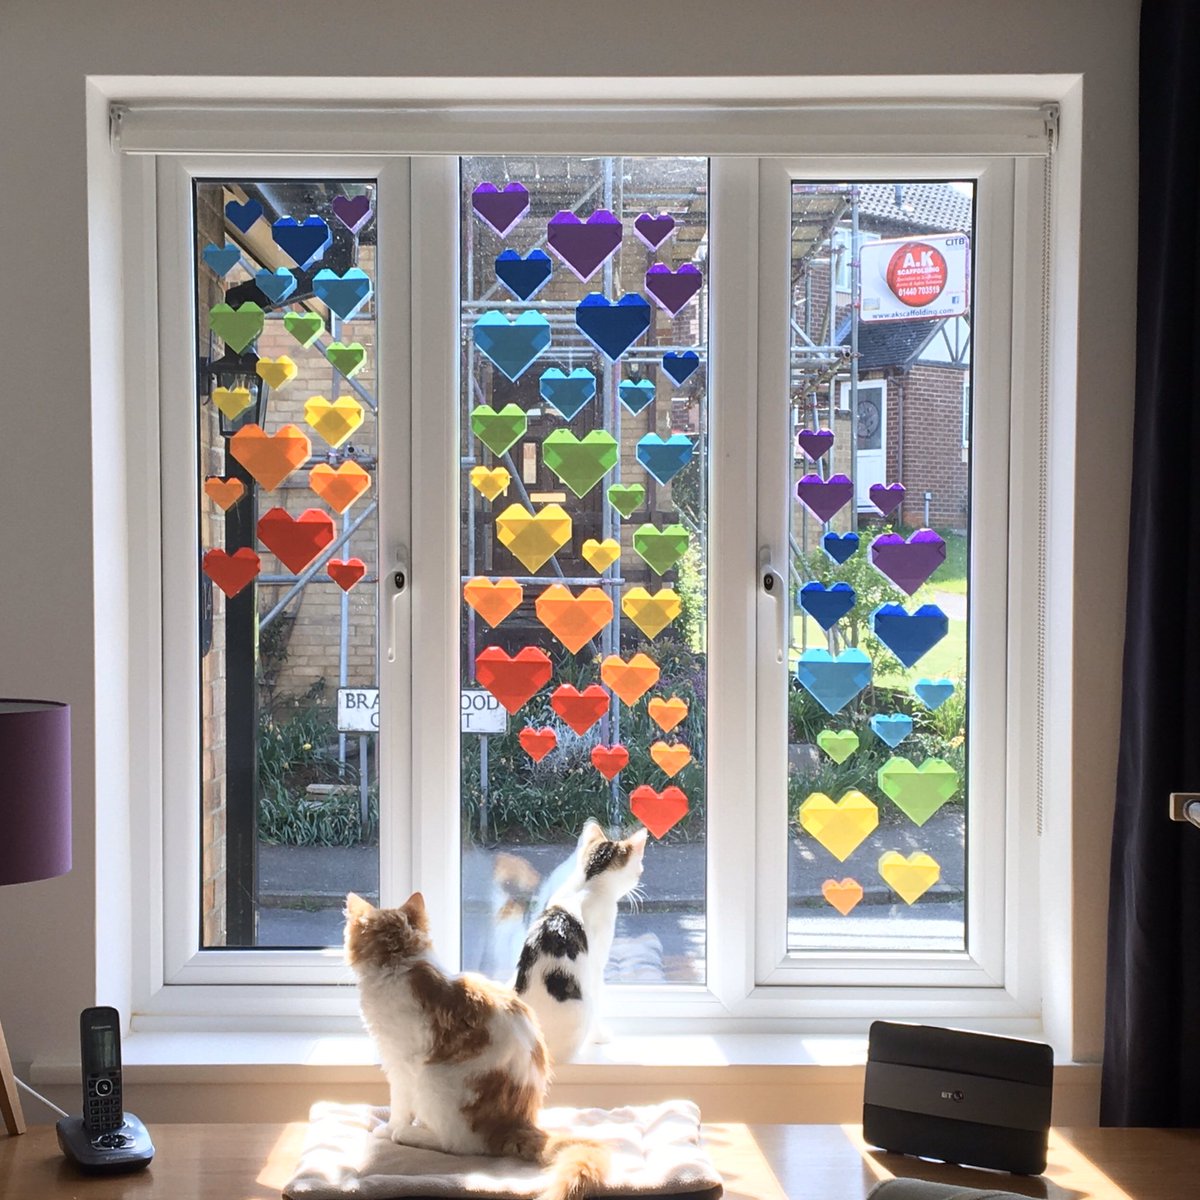 If you would like to make your own right-way-up version of my upside down (oops!) rainbow hearts window display, instructions follow in the thread below  #NHSThankYou  #LockdownOrigami  #StayHomeSaveLives